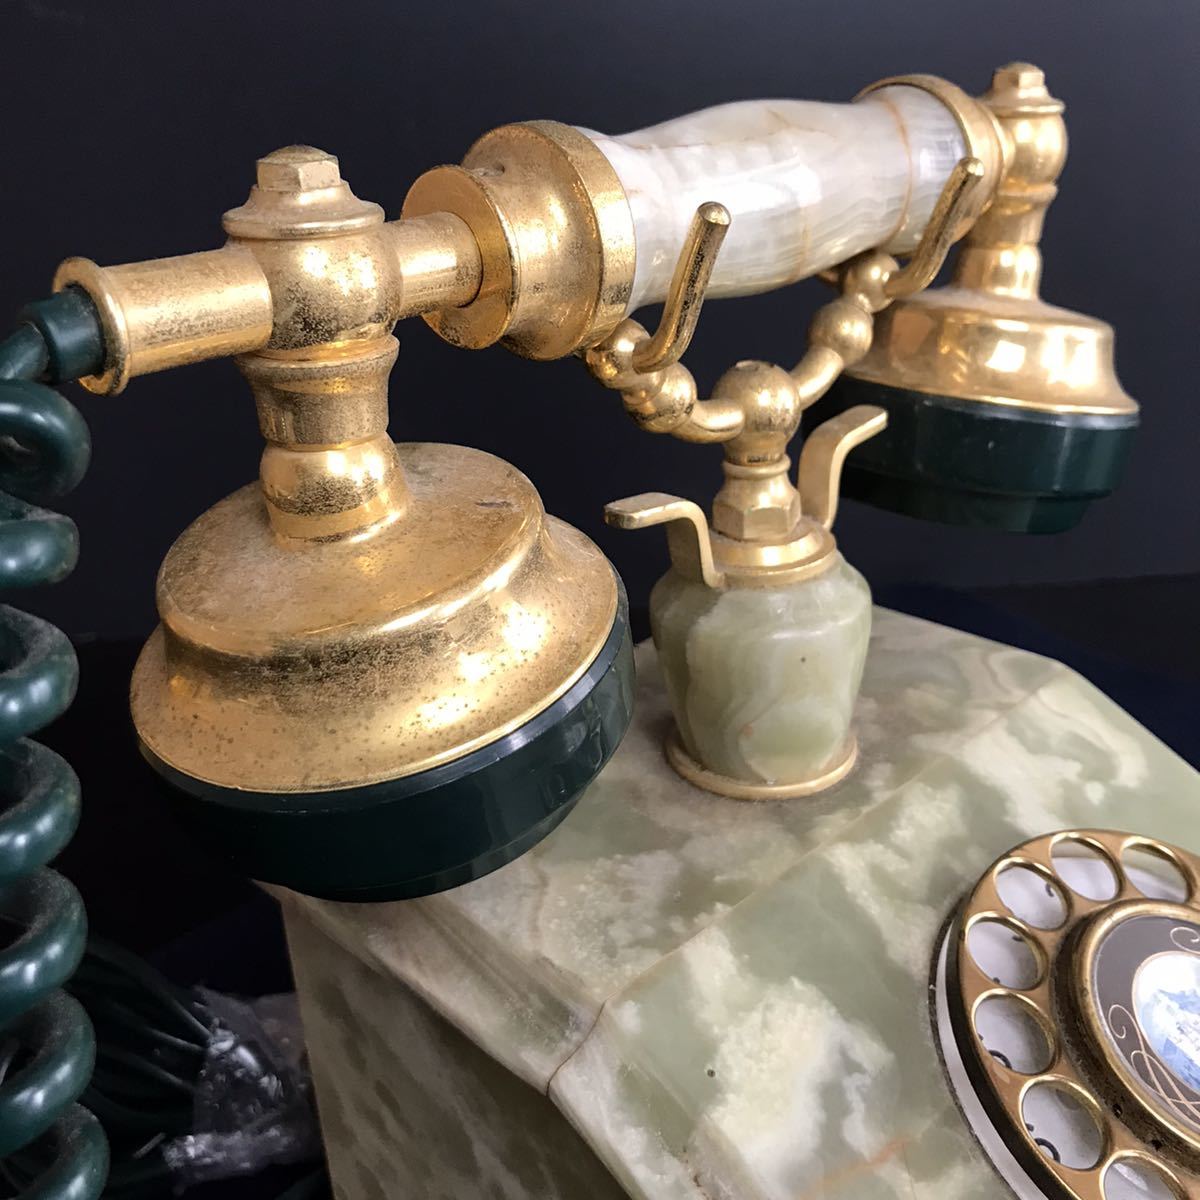 [DM417] day . electro- machine ND-260 marble case telephone machine 76 year made display objet d'art interior West antique operation not yet verification crack . ownership .